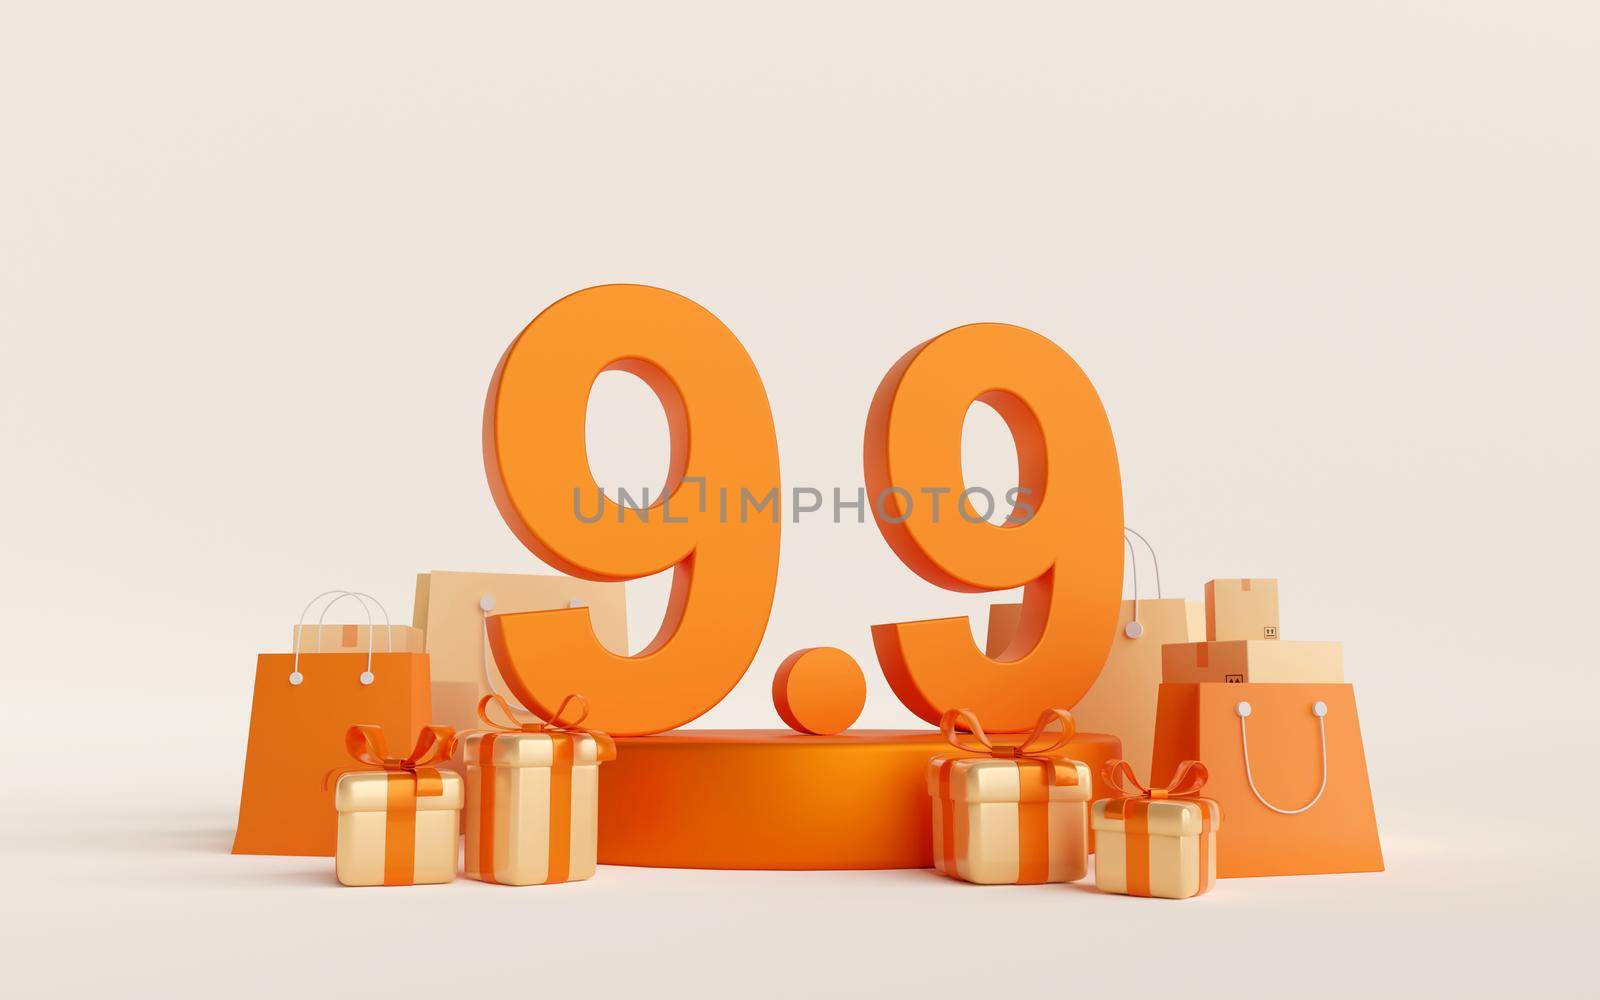 3d illustration of Promotion deal 9.9 podium with shopping bag and gift box by nutzchotwarut